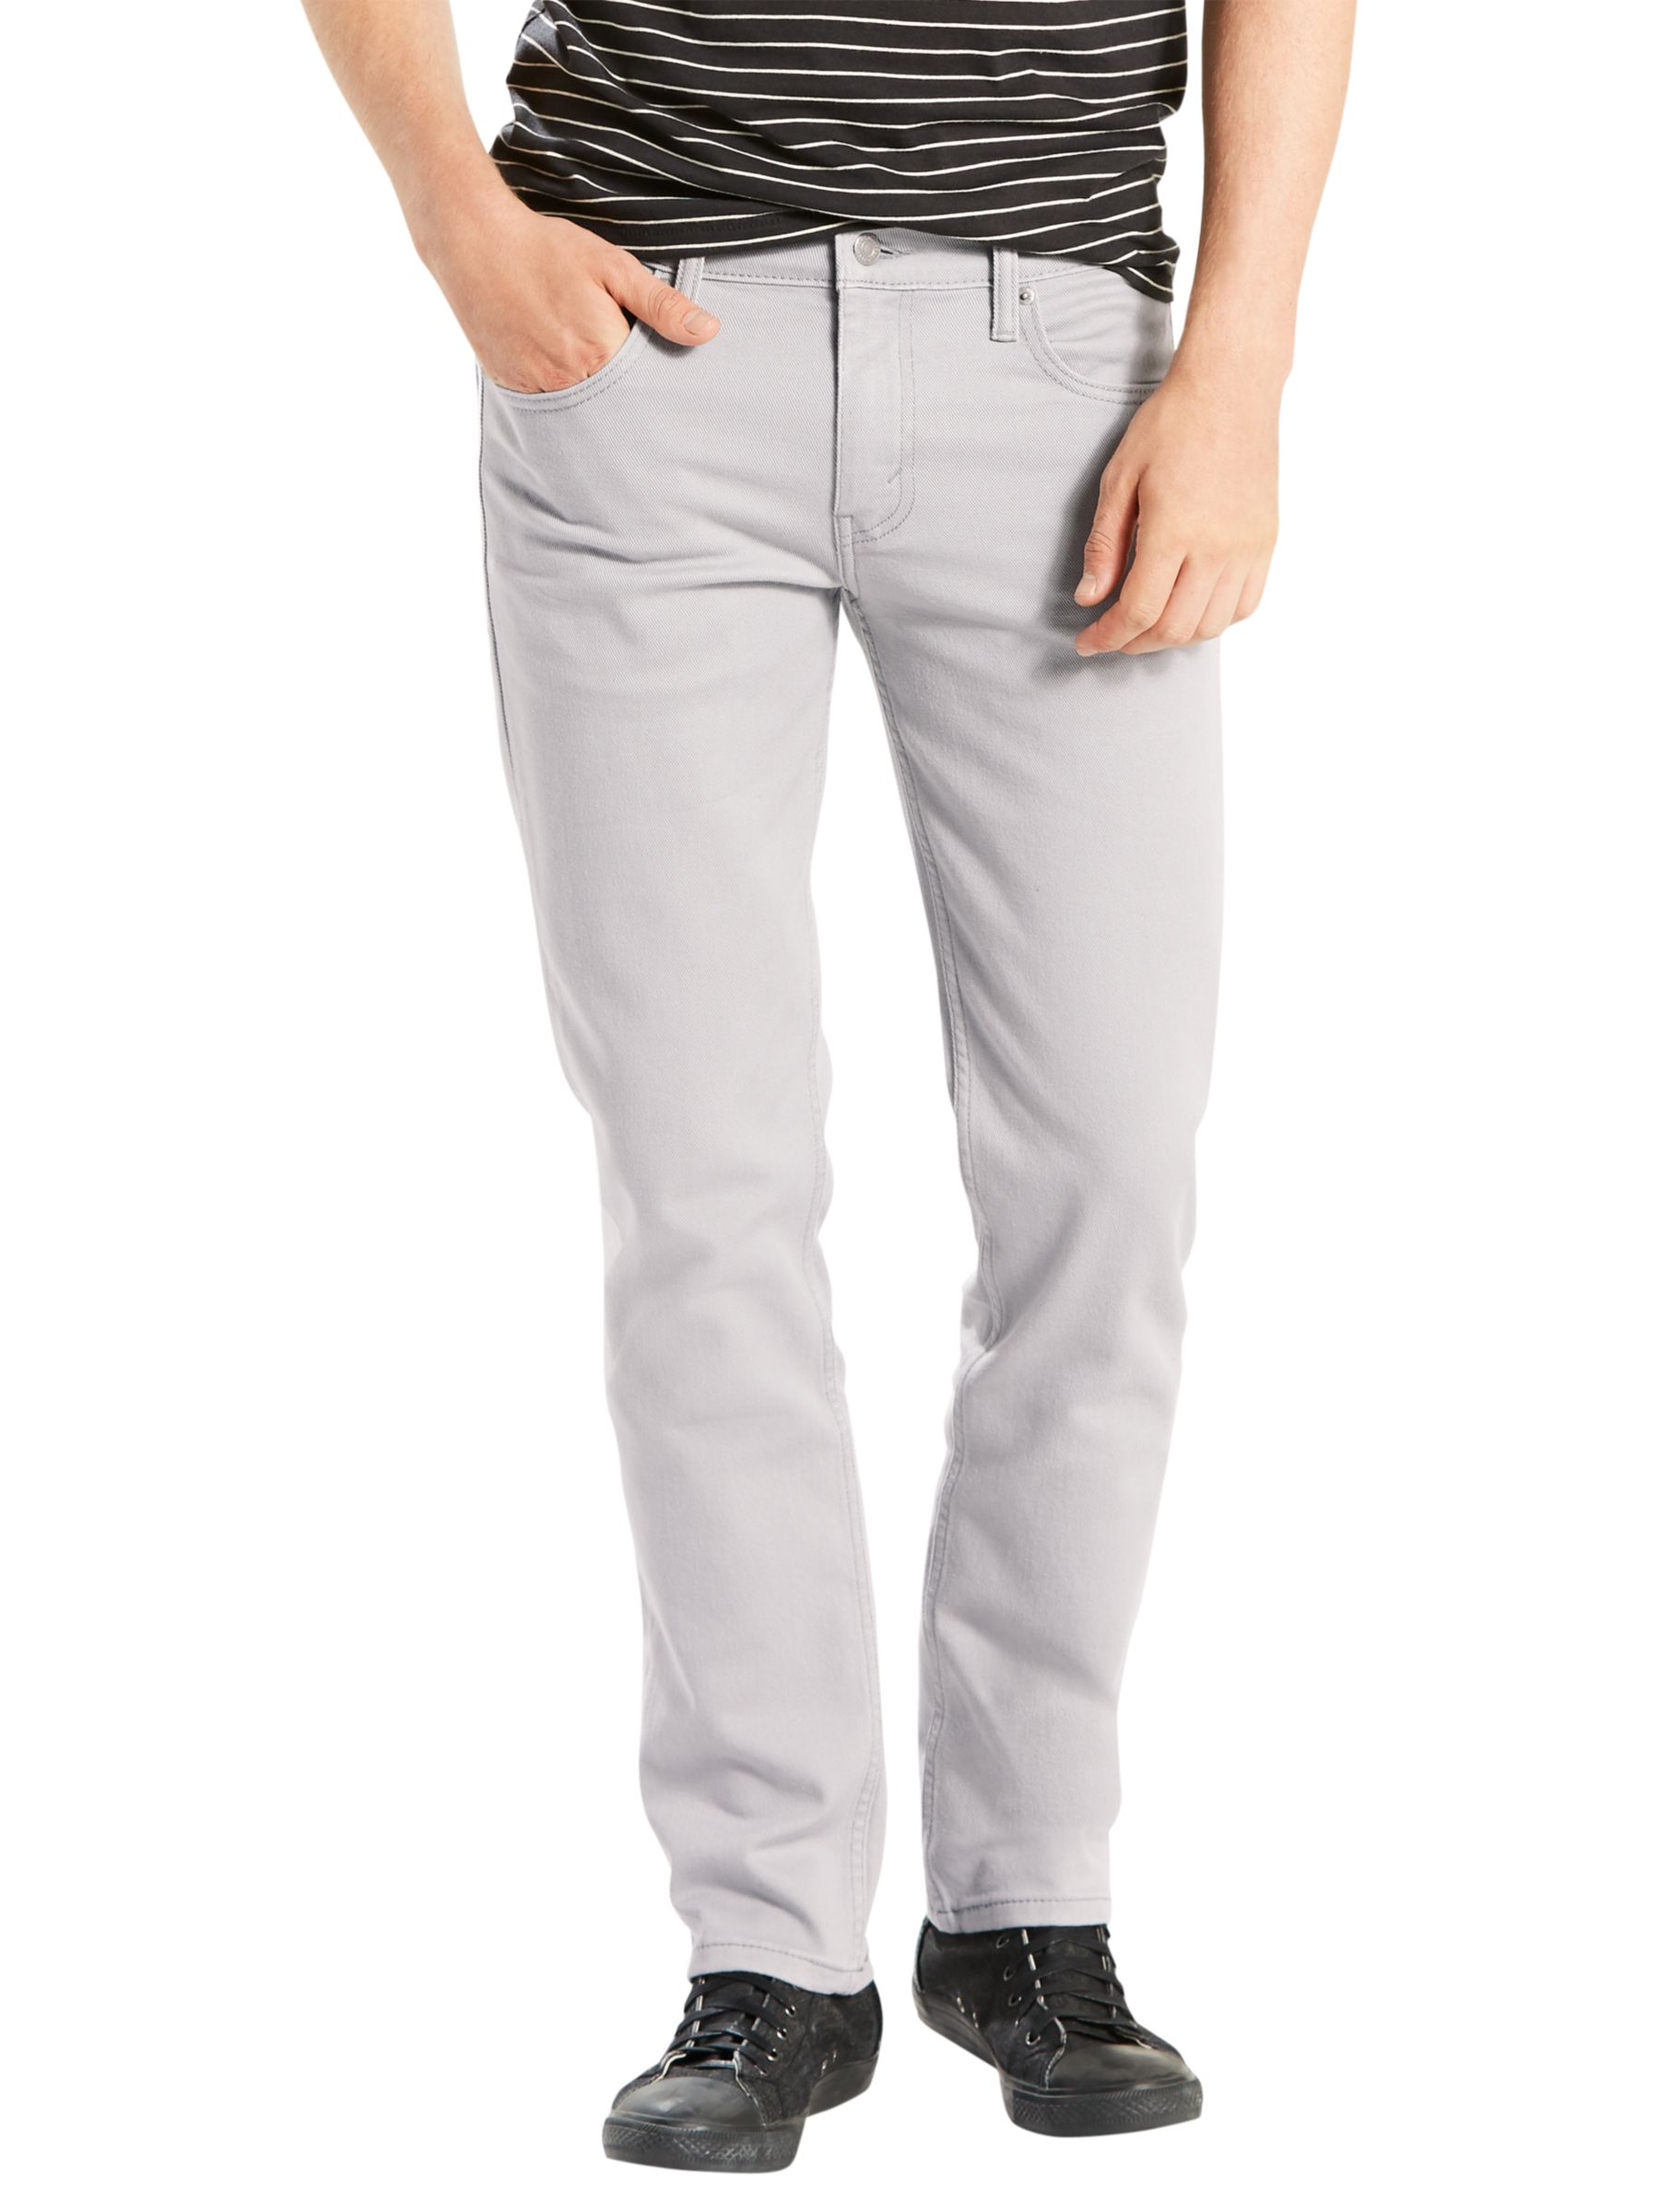 Levi's 511 Slim Fit Chinos Reviews